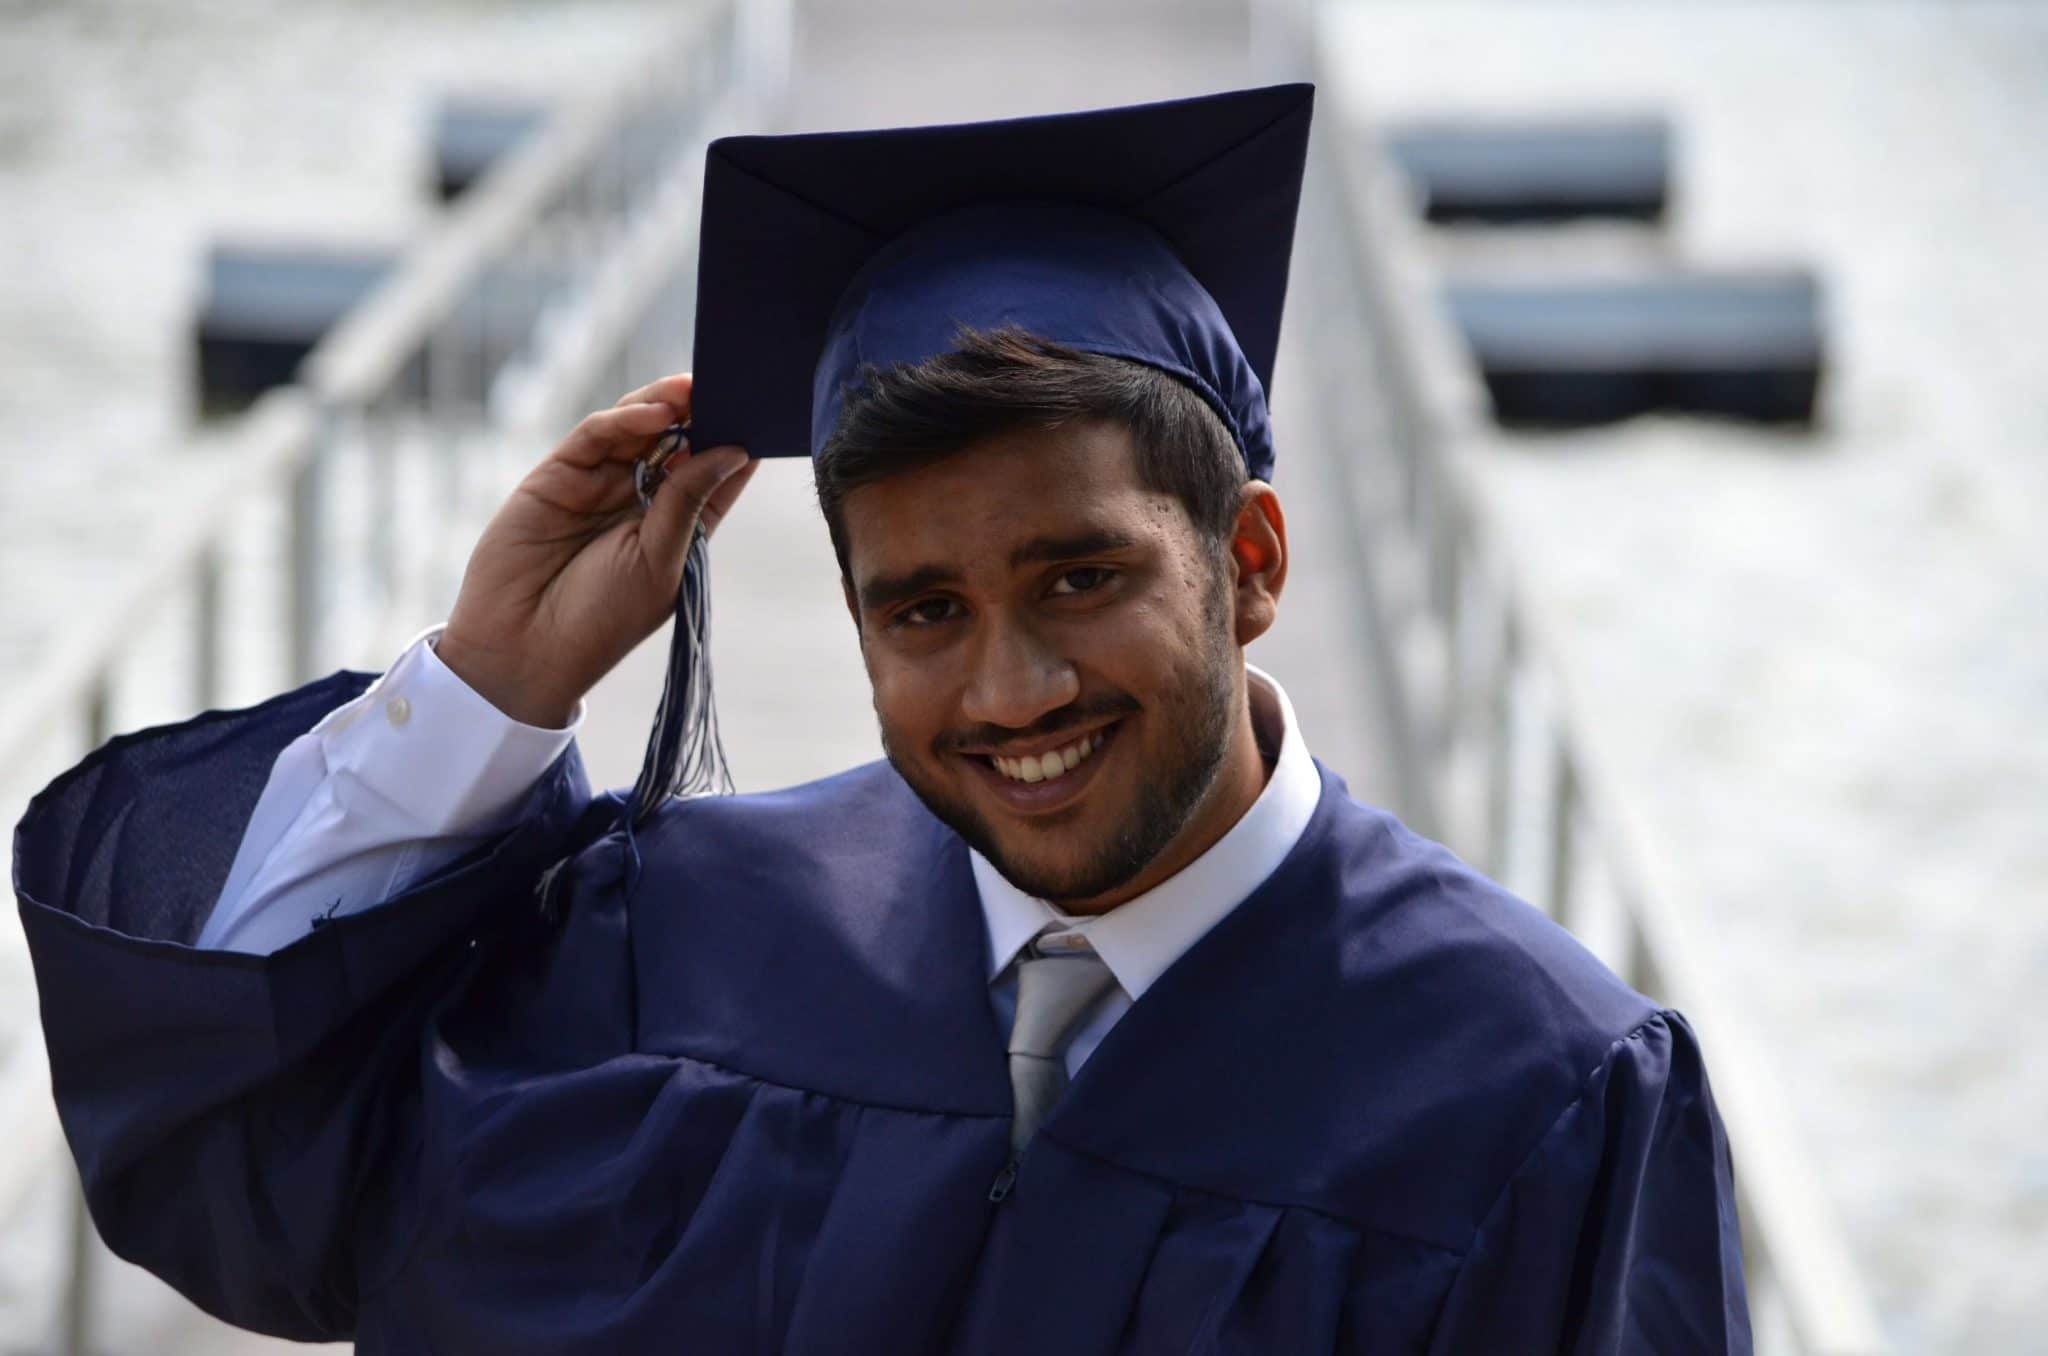 Man in a graduation gown and cap